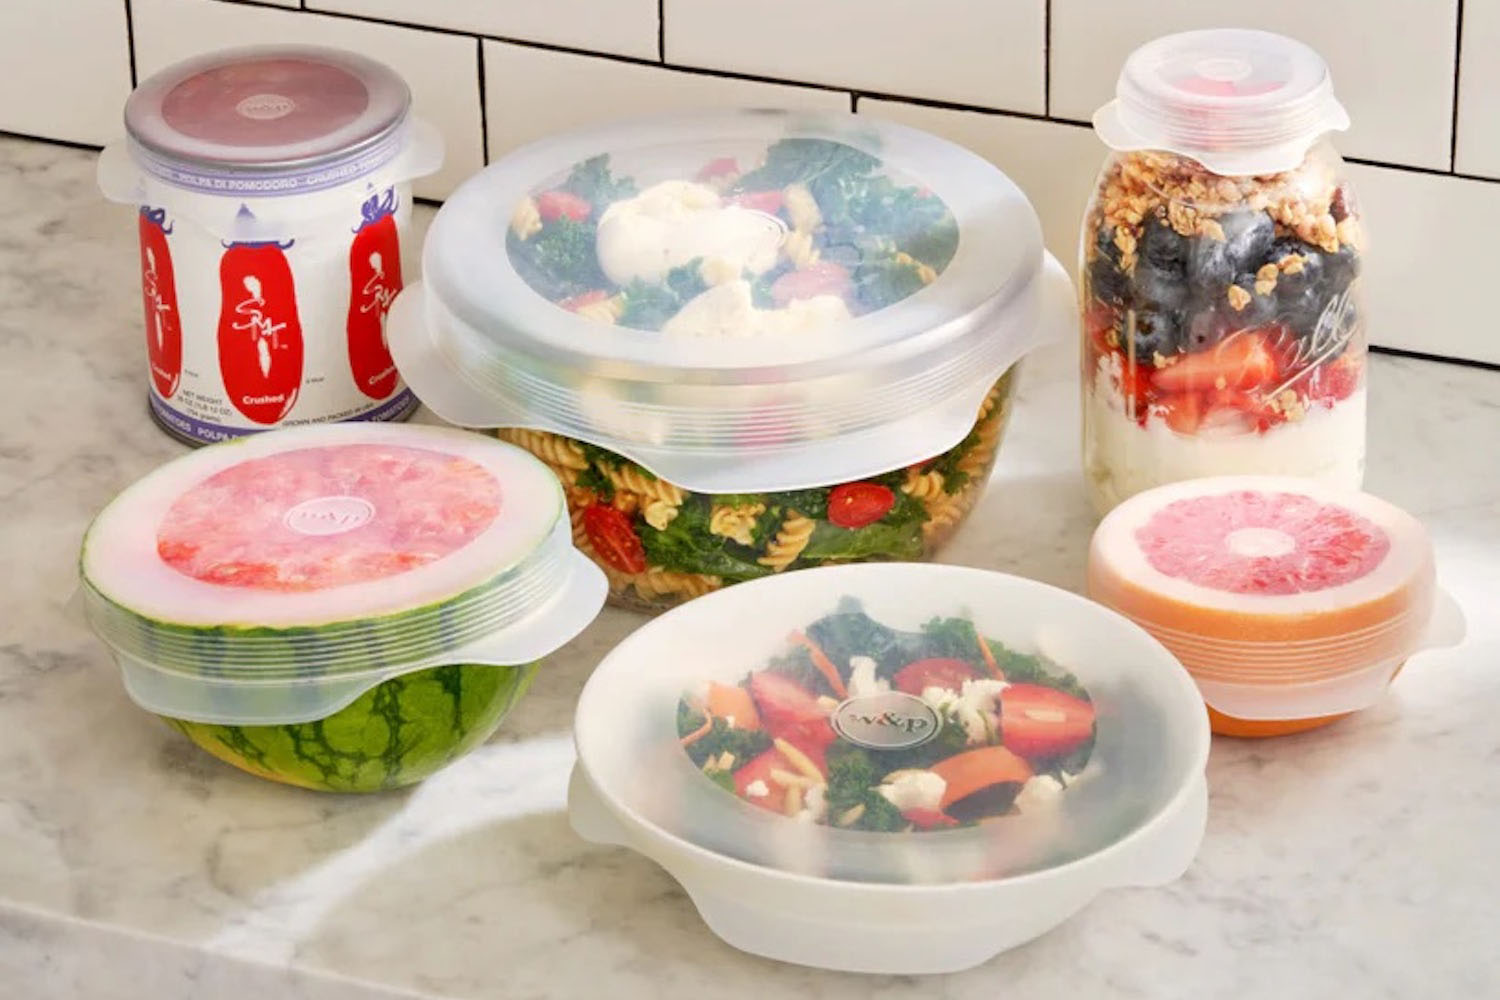 a W&P stretch wapper on tupperware and kitchen items